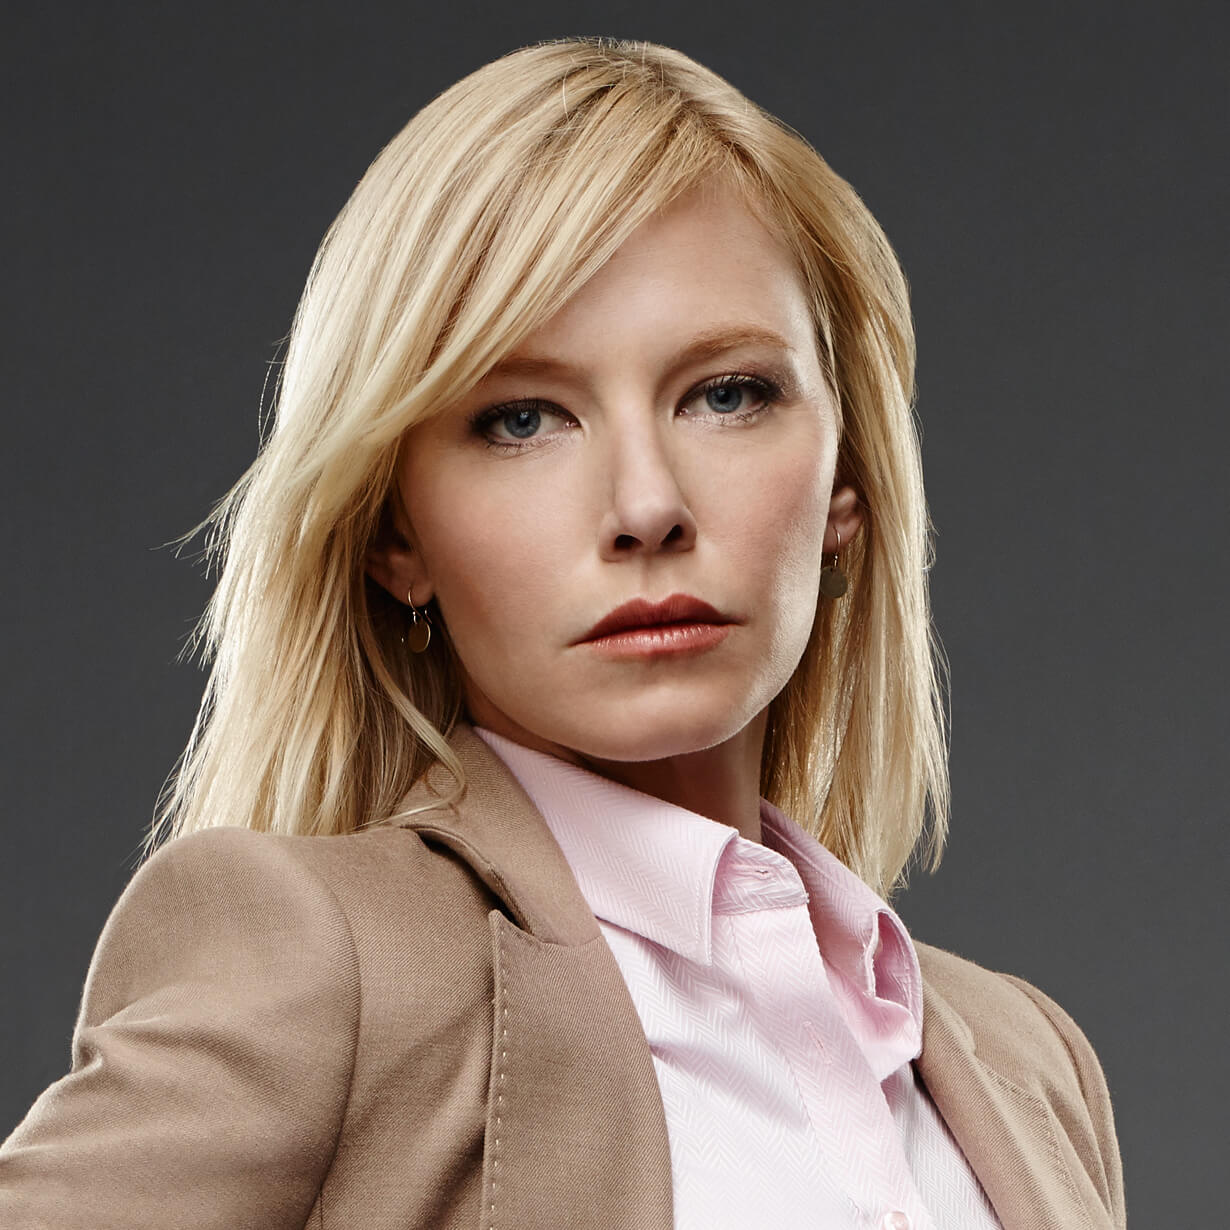 60+ Hot Pictures Of Kelli Giddish Are Just Too Yum For Her Fans 3